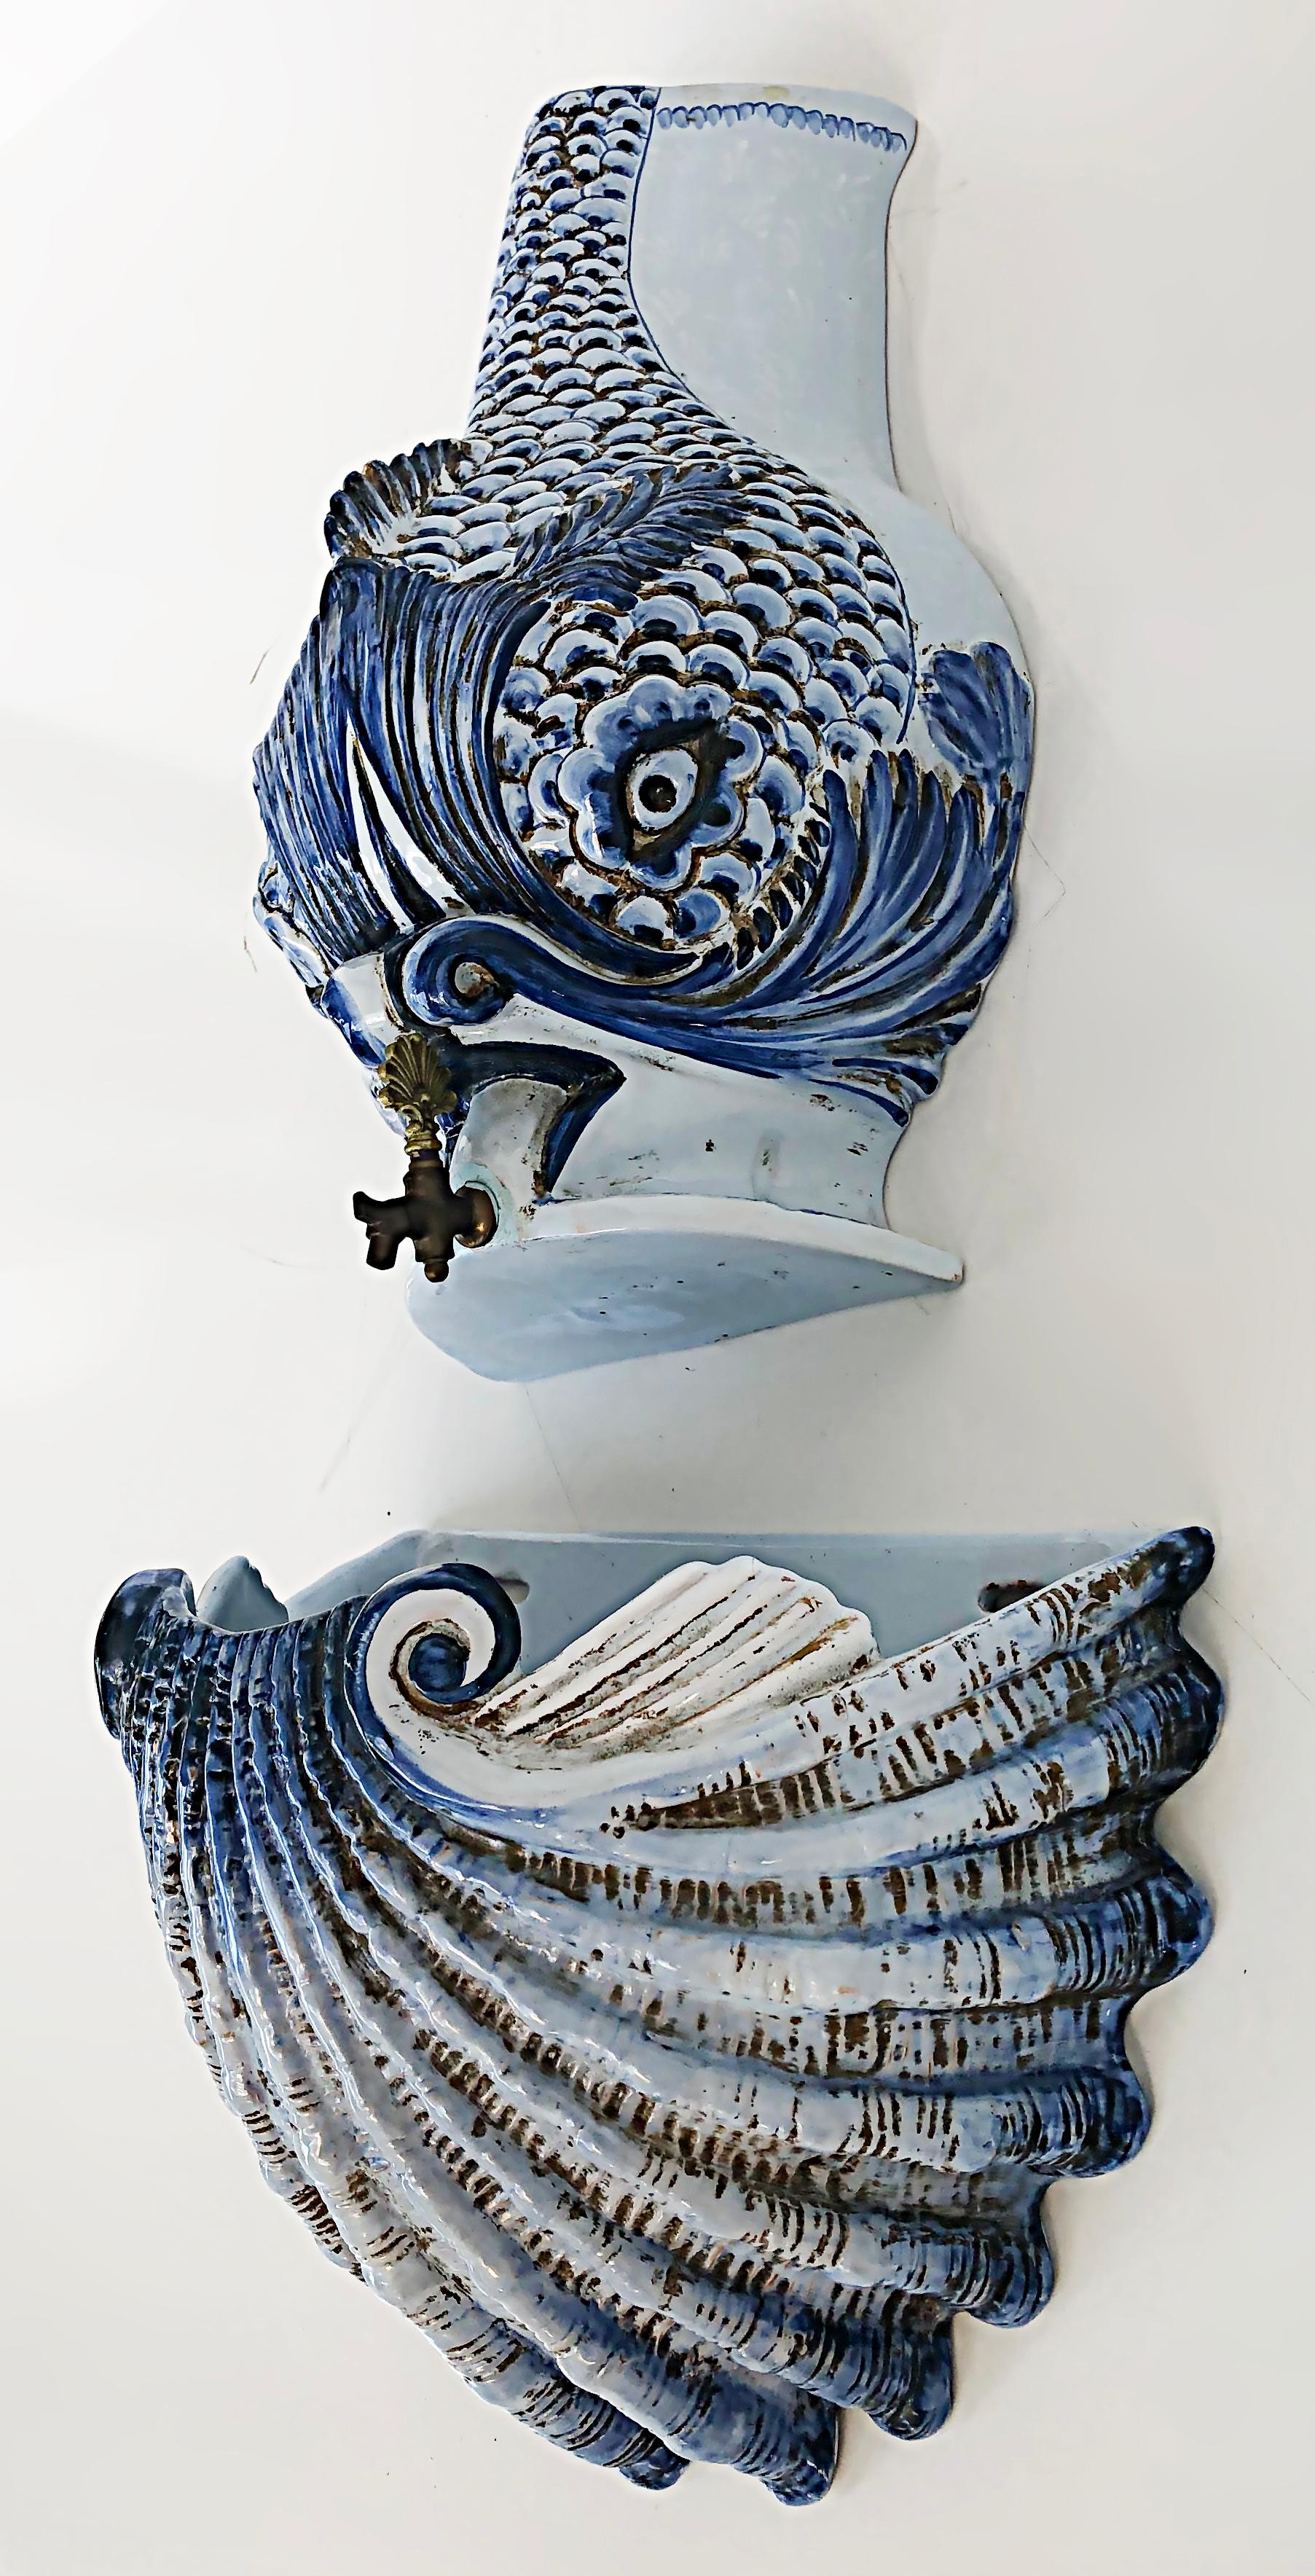 Italian glazed ceramic dolphin wall fountain lavabo with shell.

Offered for sale is an Italian garden ornament of a glazed ceramic dolphin wall fountain with a shell collector for the water. The dolphin design is after works by Pierre Joseph